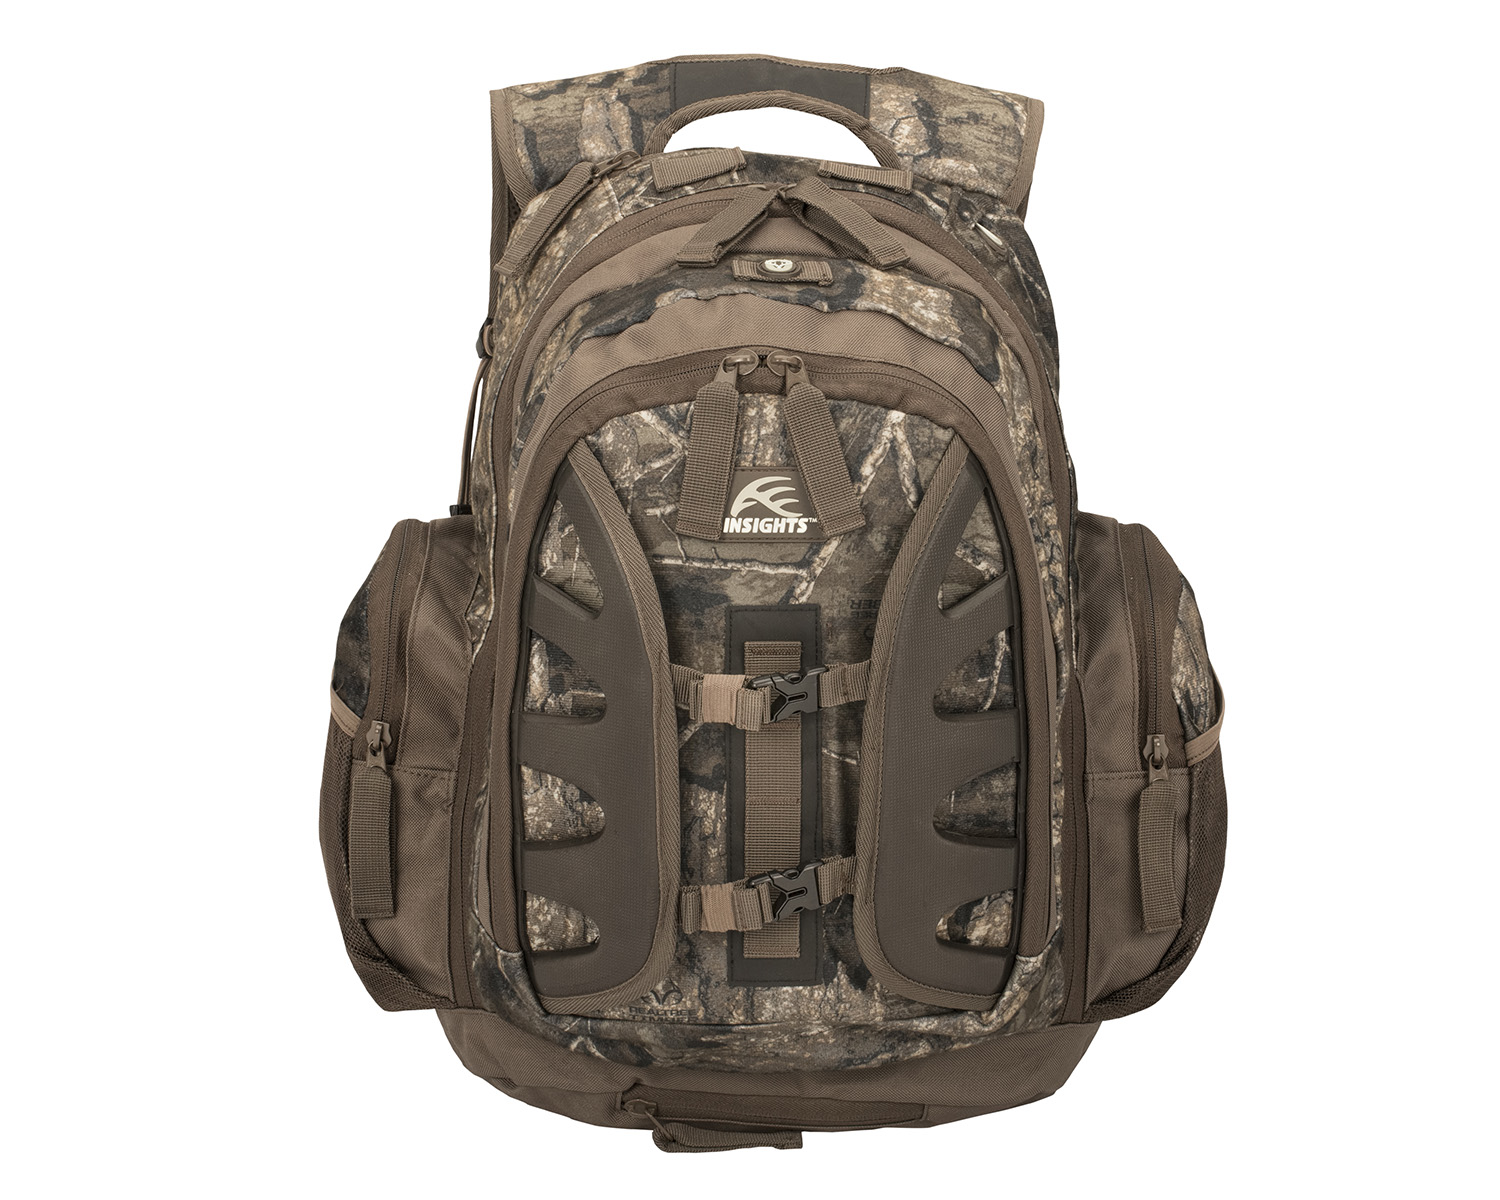 INSIGHTS THE ELEMENT DAY PACK REALTREE TIMBER 1,831 CU INCH